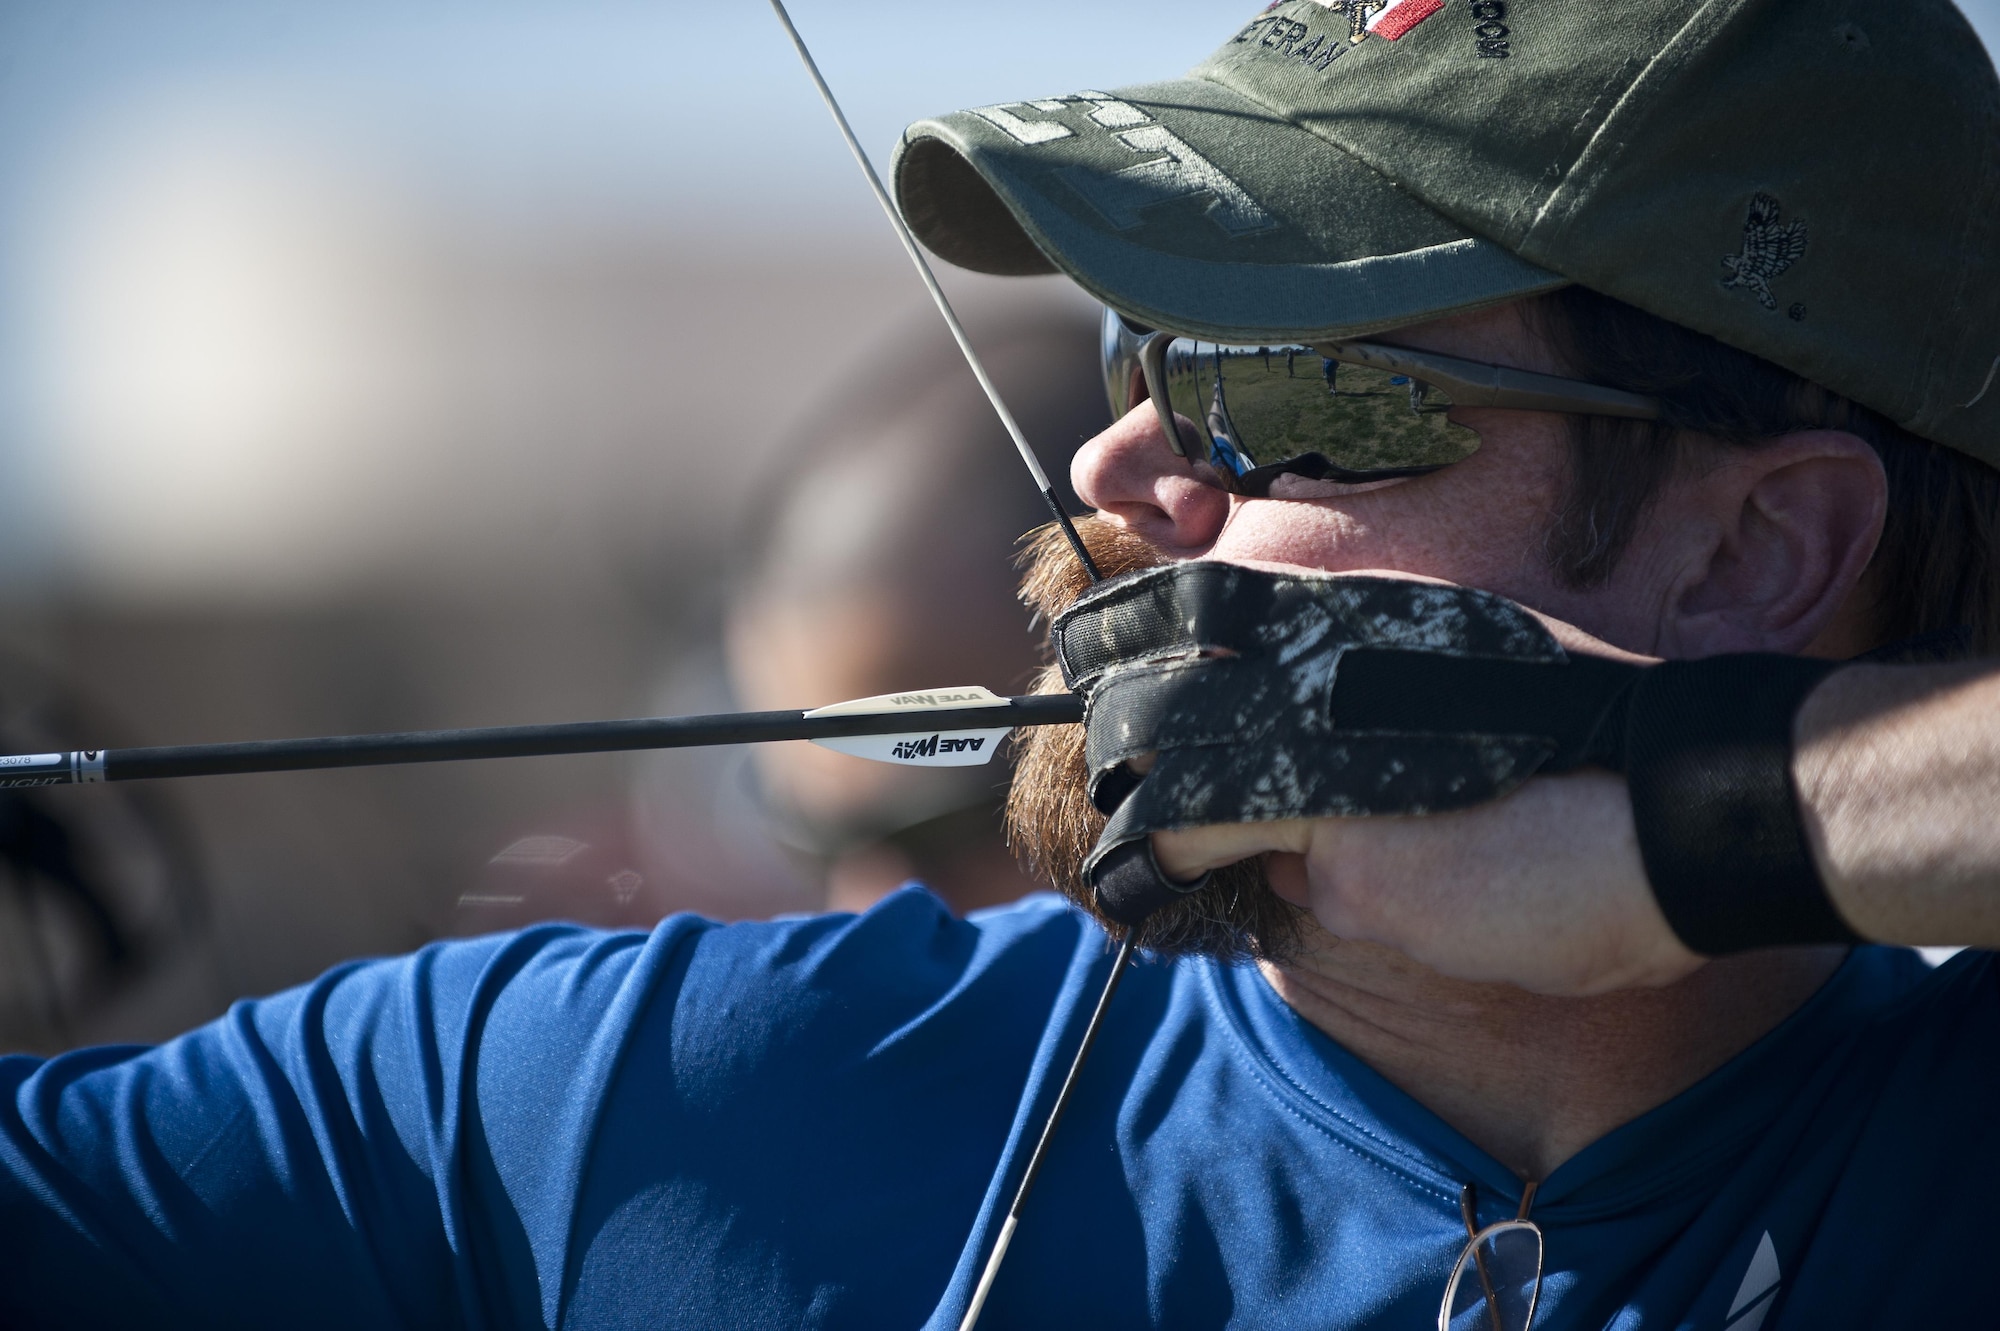 Retired U.S. Air Force Chief Master Sgt. Robert Zukauskas aims at a target during an archery practice session Feb. 27, 2015, at Nellis Air Force Base, Nev. Zukauskas suffered multiple injuries from a rocket attack during a deployment to Iraq in 2009. (U.S. Air Force photo/Staff Sgt. Siuta B. Ika)